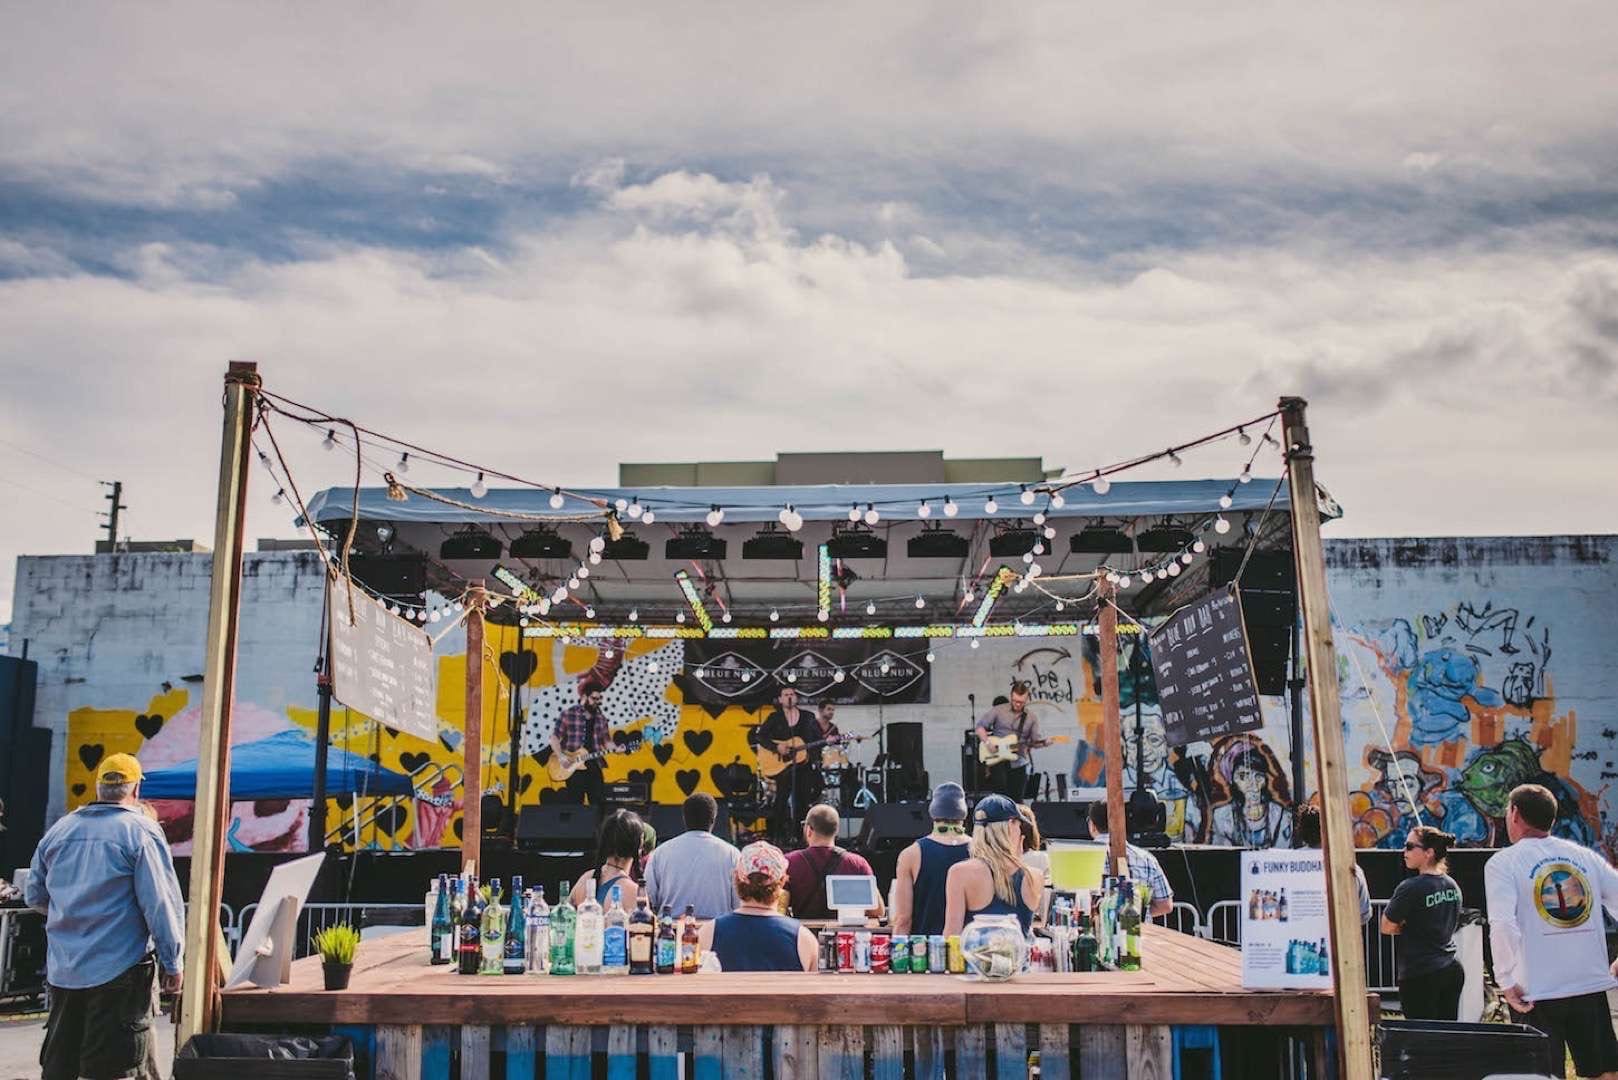 Performing for small crowd with bar with alcoholic and non-alcoholic drinks in the foreground For at the Love Music Festival 